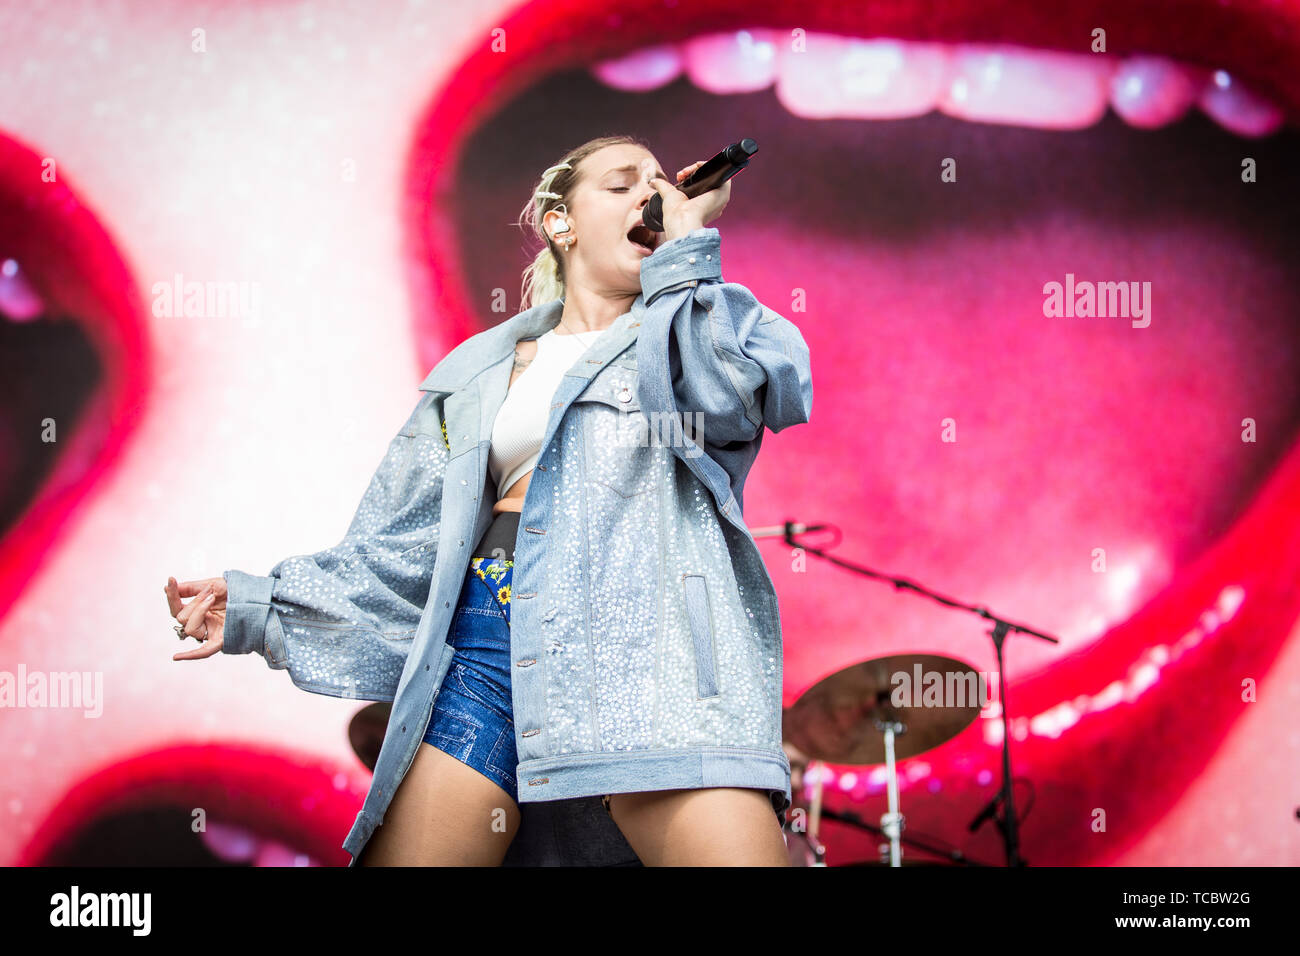 Denmark. 06th June, 2019. Denmark, Aarhus - June 6, 2019. The Swedish singer and songwriter Tove Lo performs a live concert during the Danish music festival Northside 2019 in Aarhus. (Photo Credit: Gonzales Photo/Alamy Live News Stock Photo